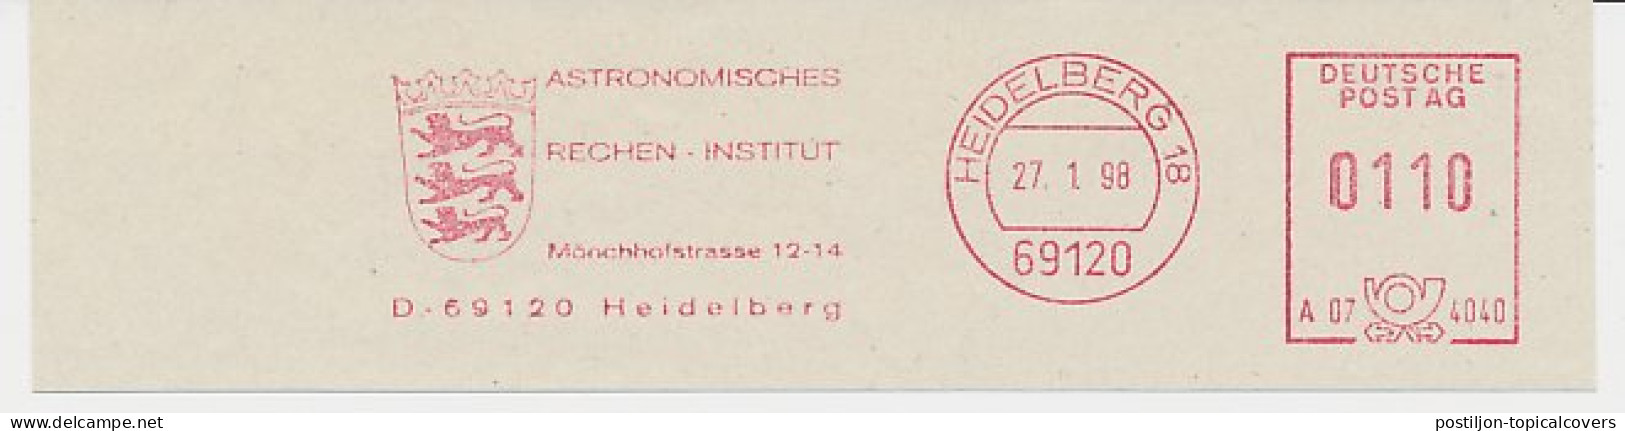 Meter Cut Germany 1998 Astronomical Calculation Institute - Astronomie